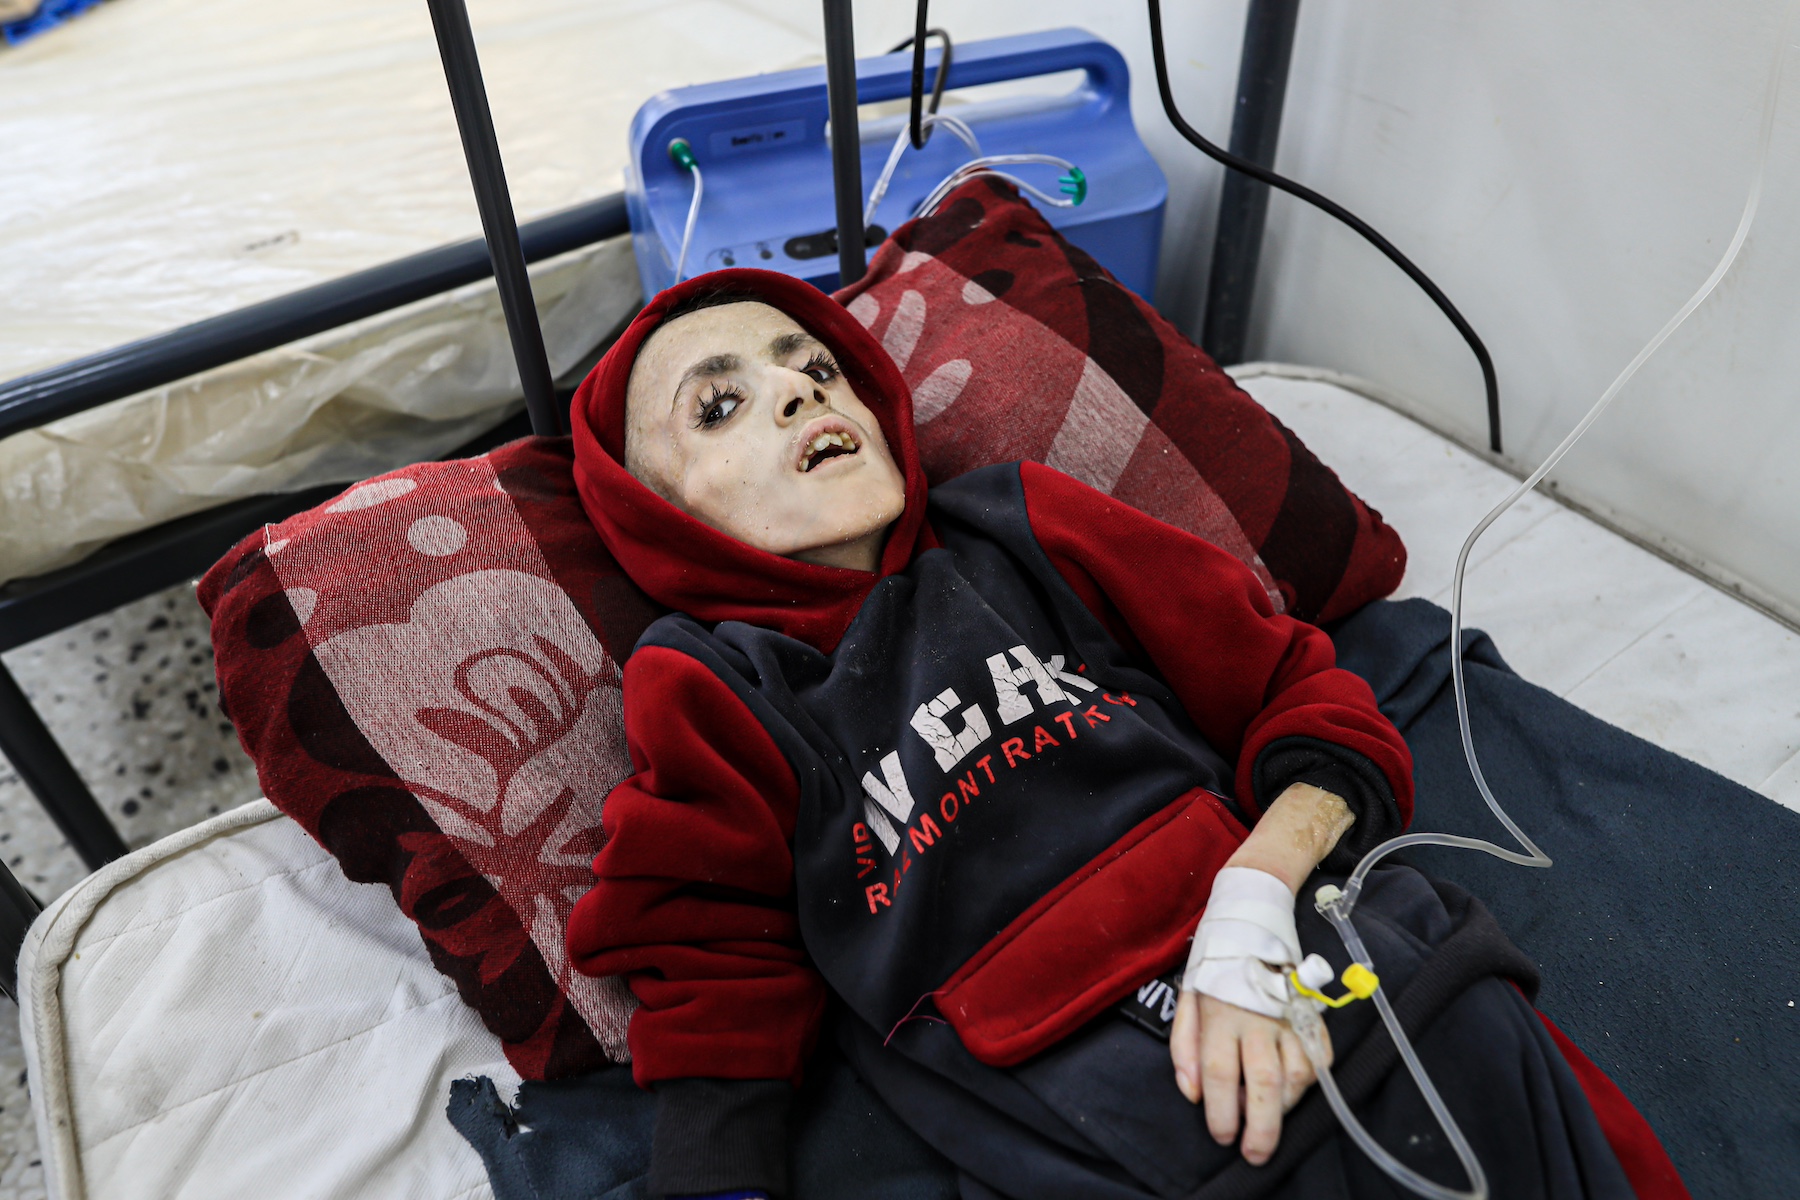 Gaza Is Suffering The World’s Worst Current Hunger Crisis